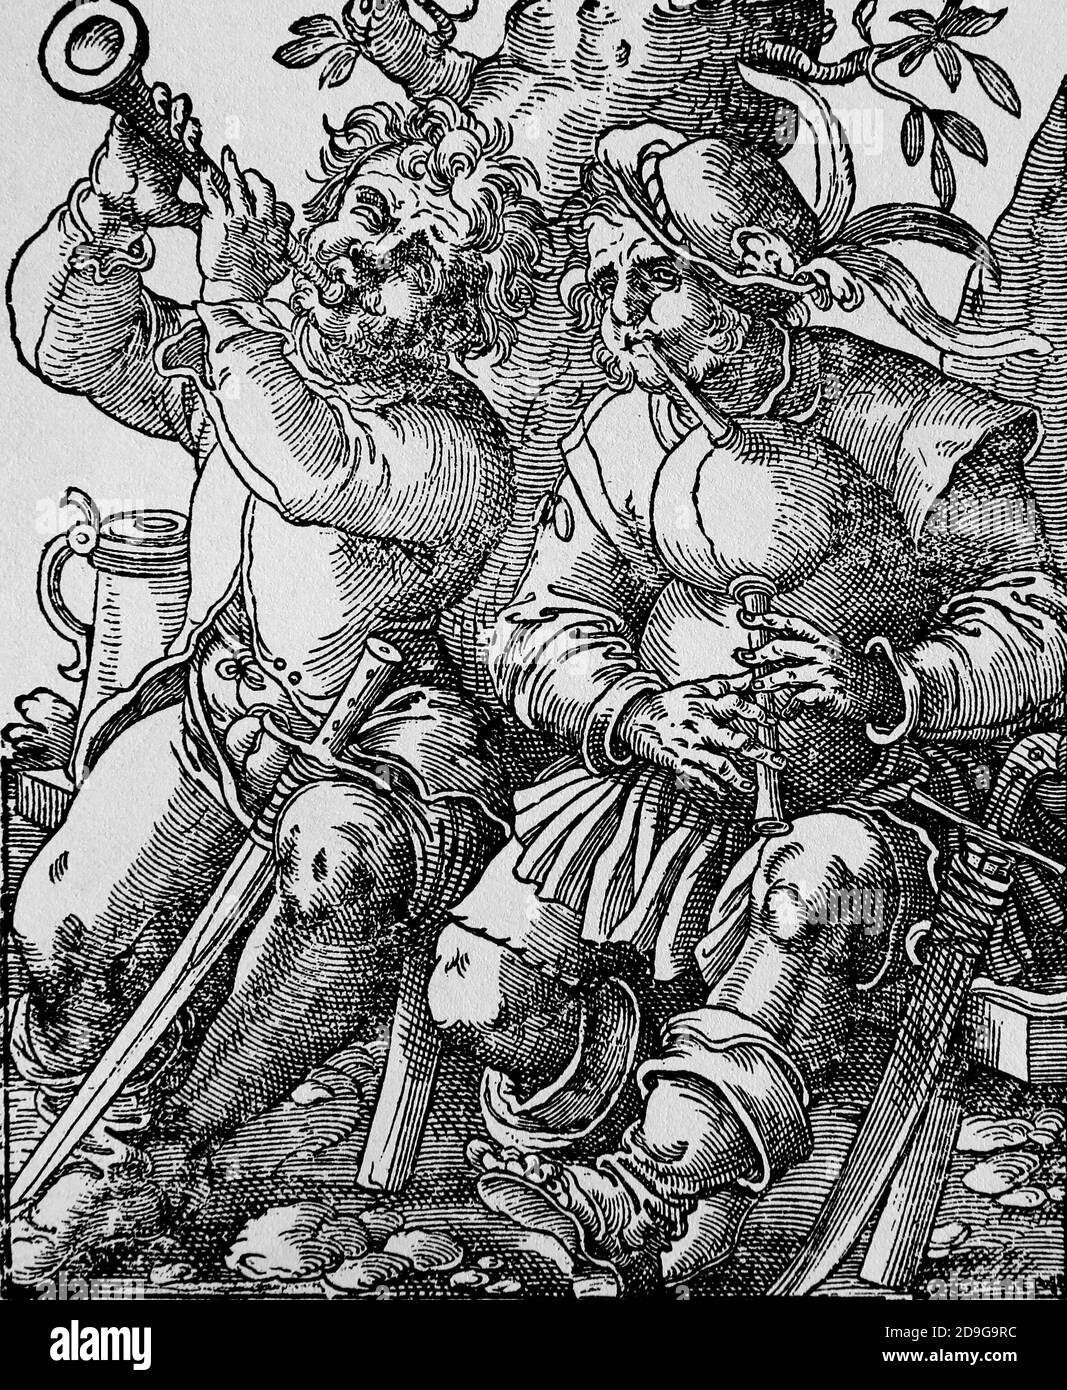 Modern period. Europe. 16th century. Two musics. Engraving by Jost Amman (1539-1591). Stock Photo